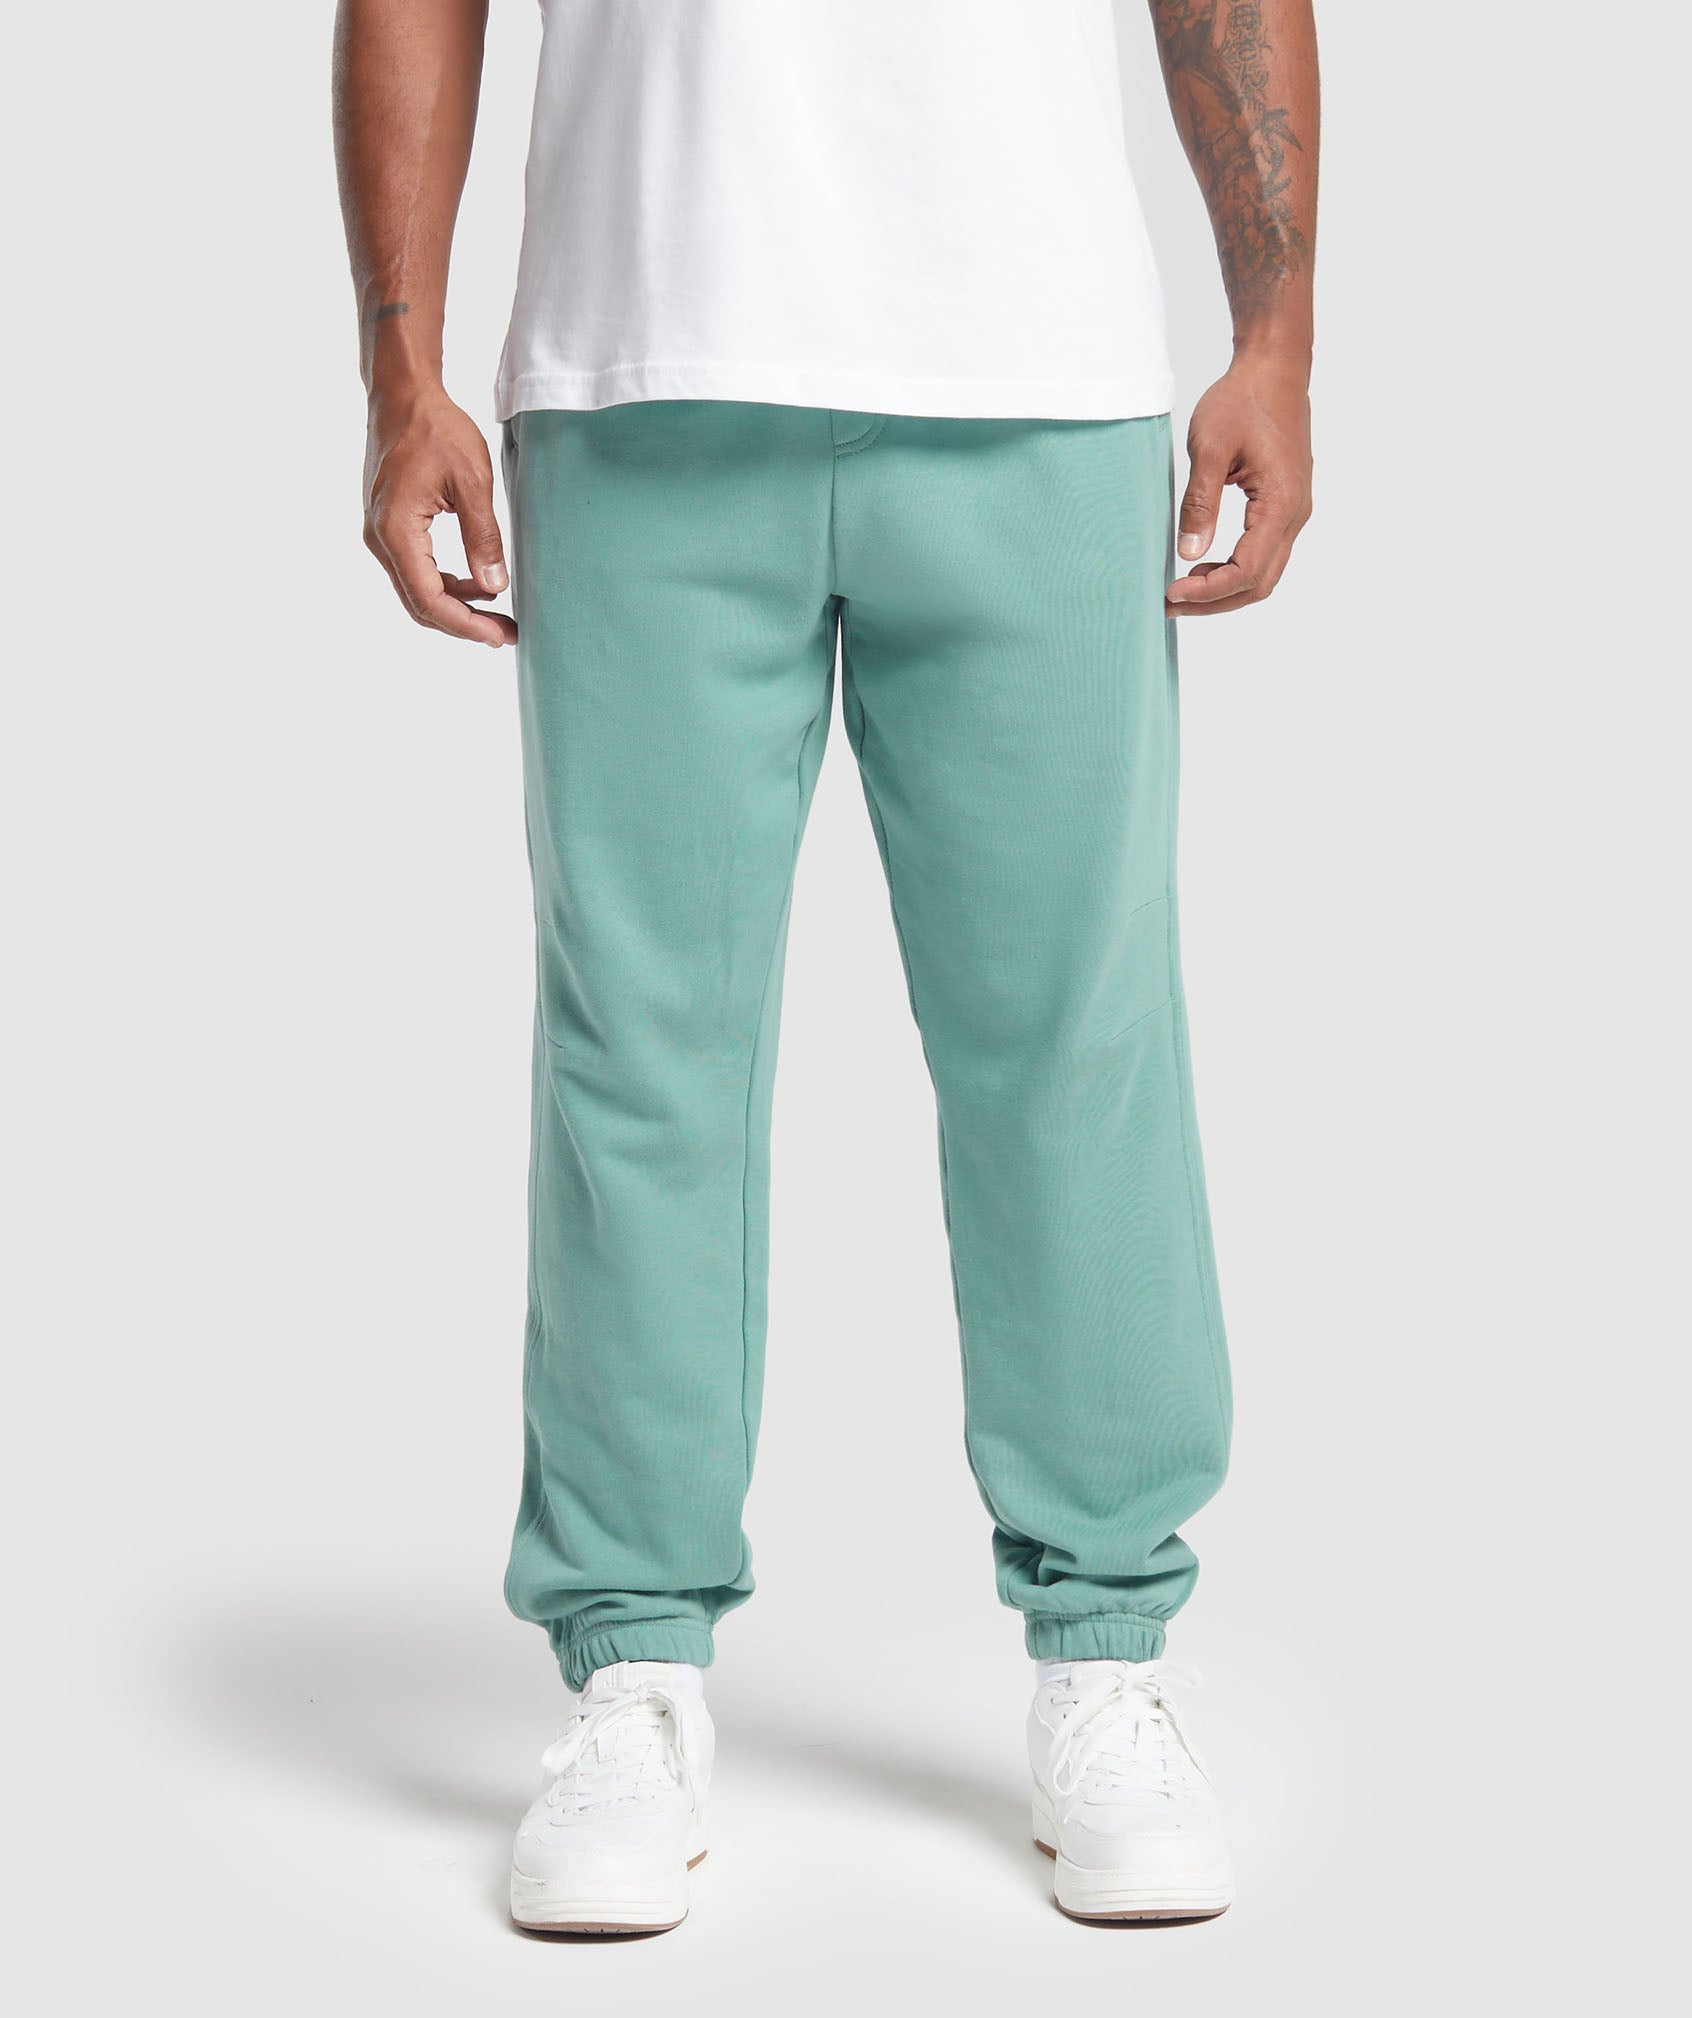 Rest Day Essentials Joggers in Duck Egg Blue